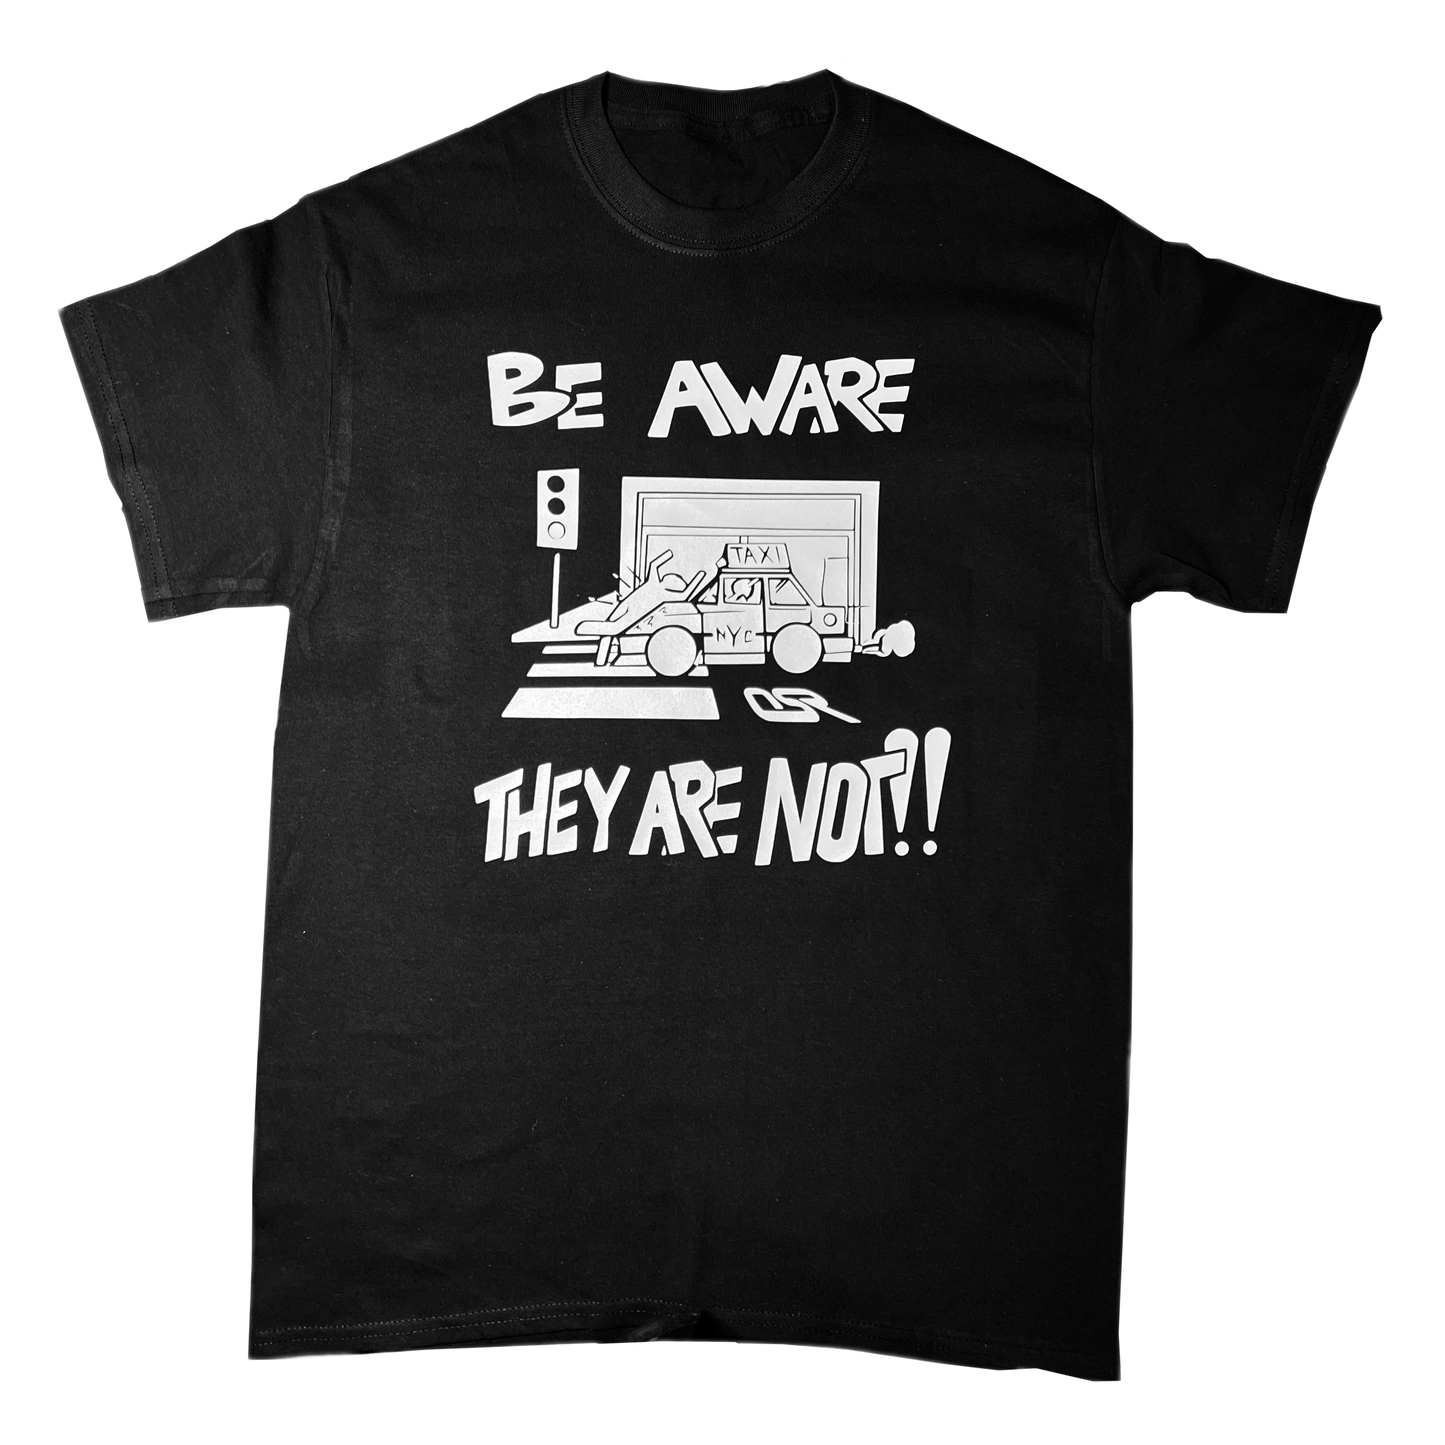 "Be Aware That They Are Not!" T-Shirt